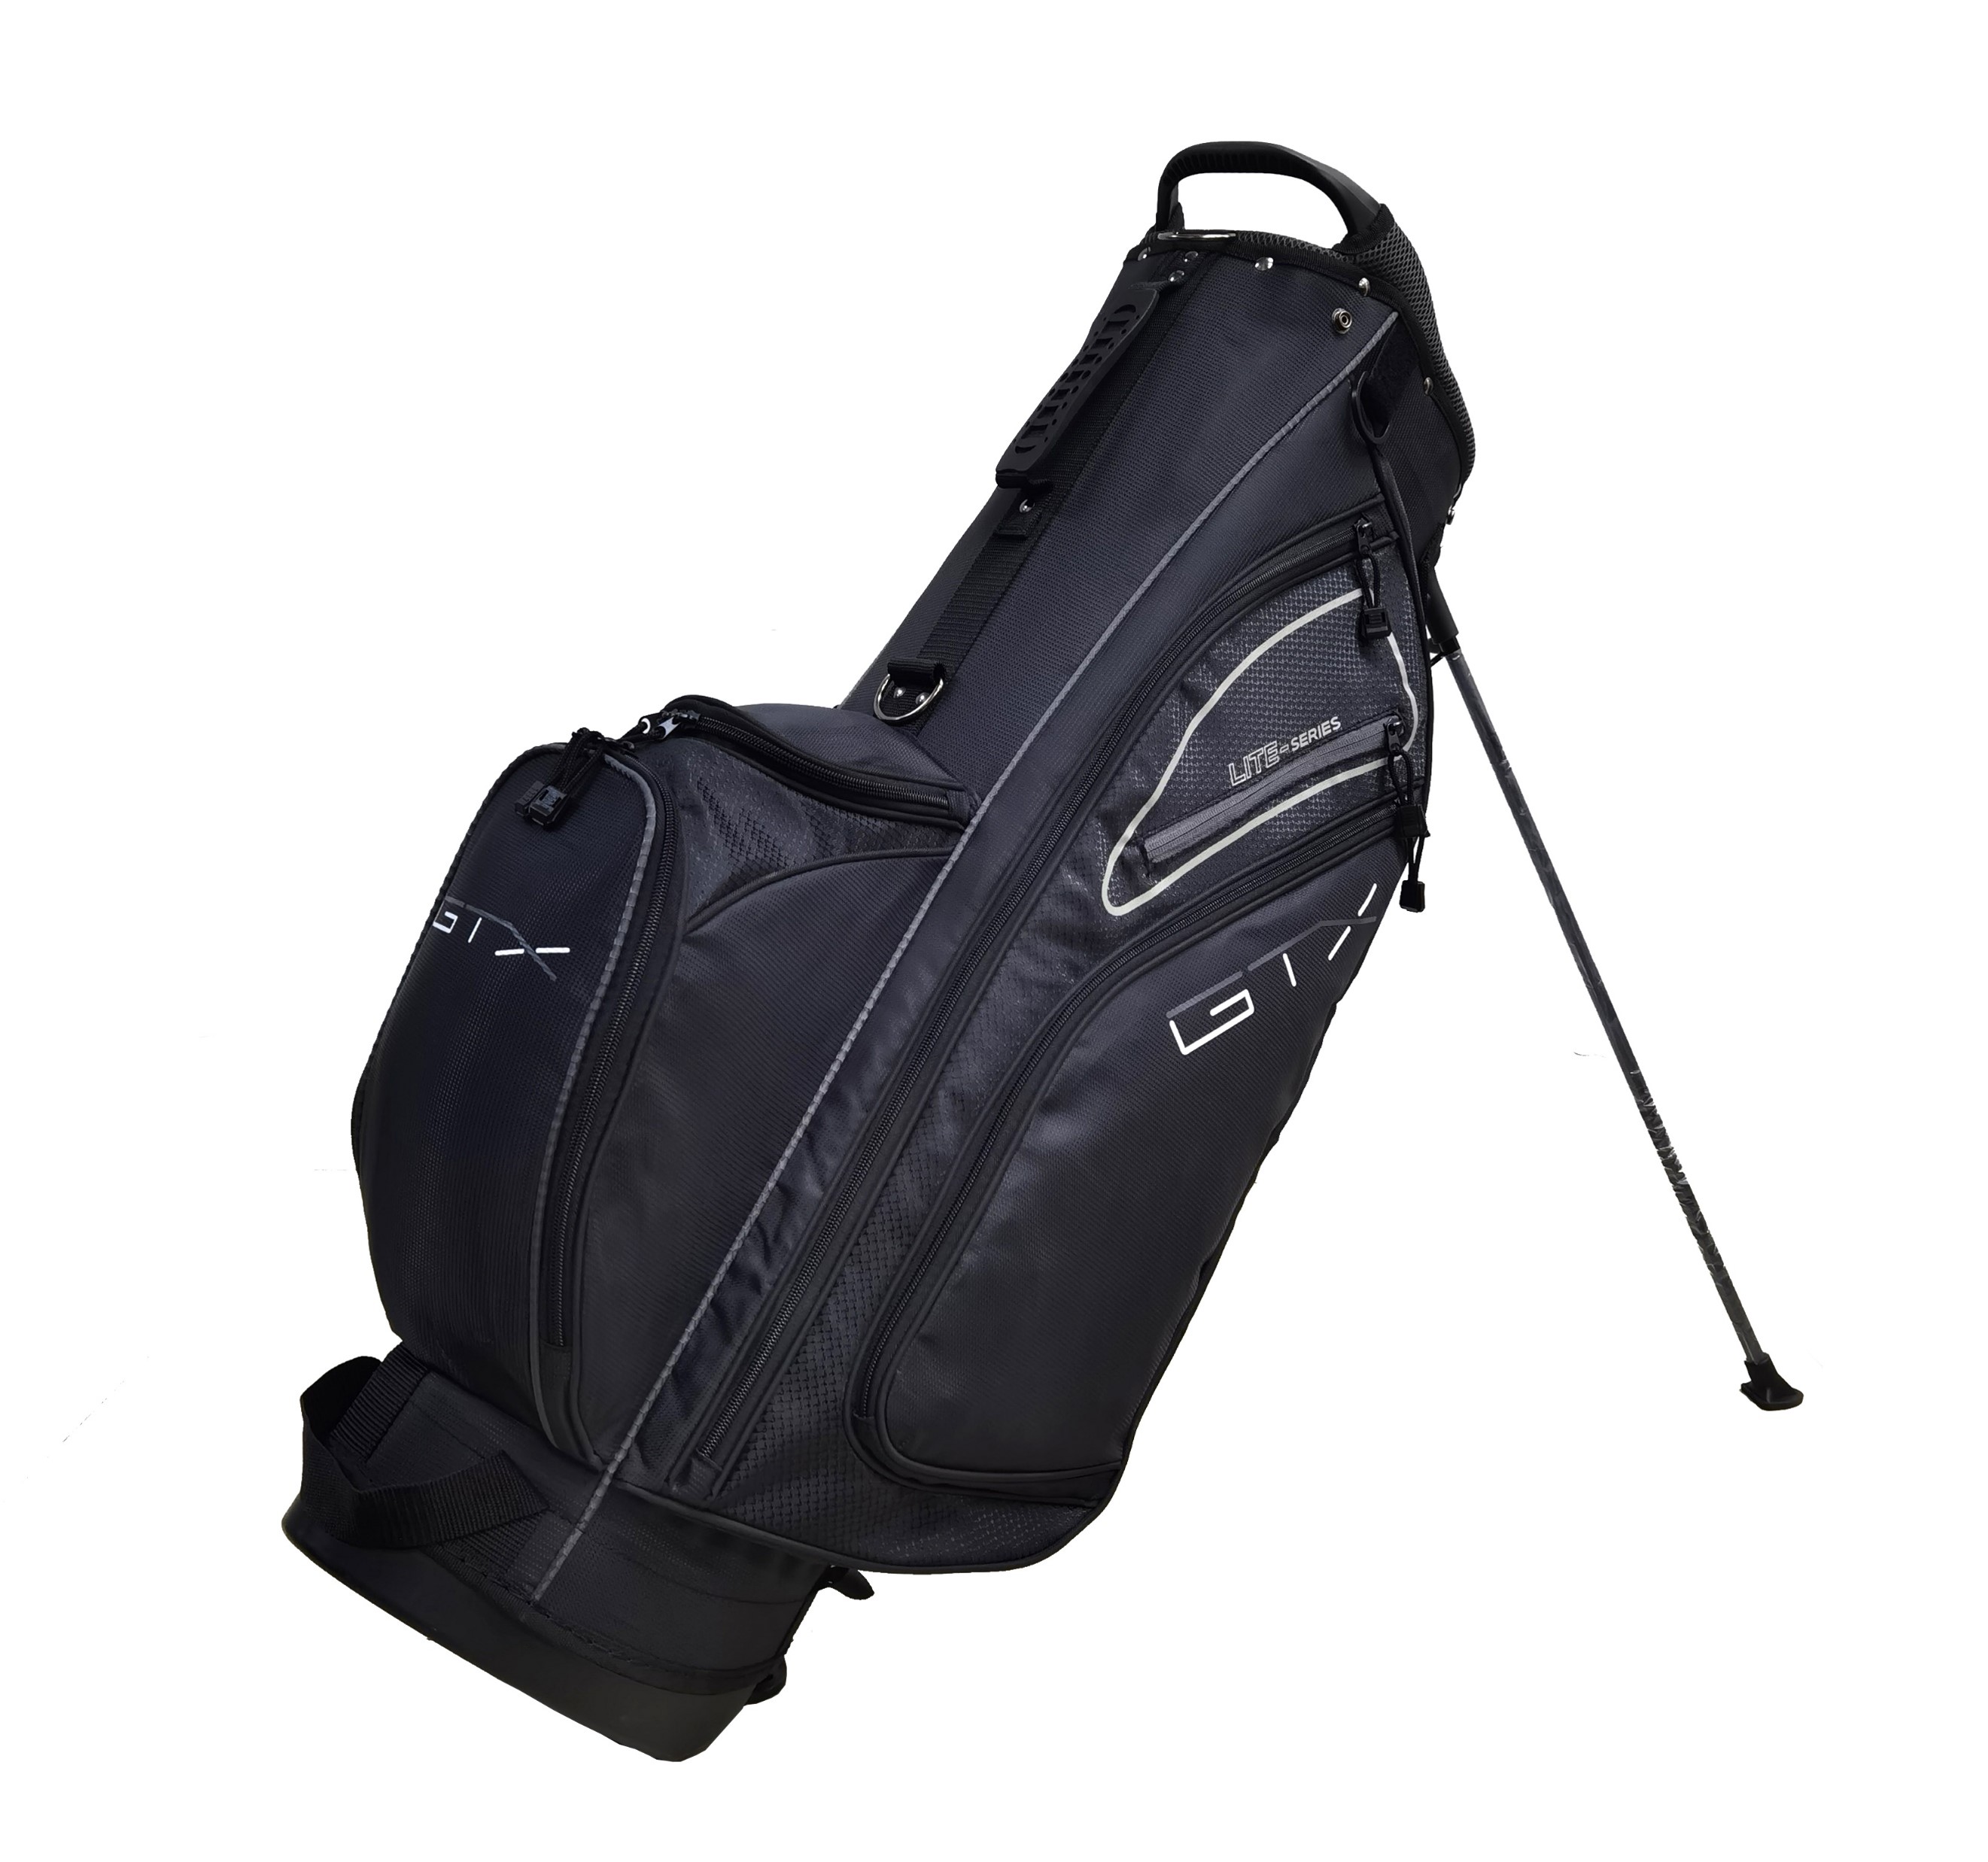 Golf Stand Bag at Best Price in India